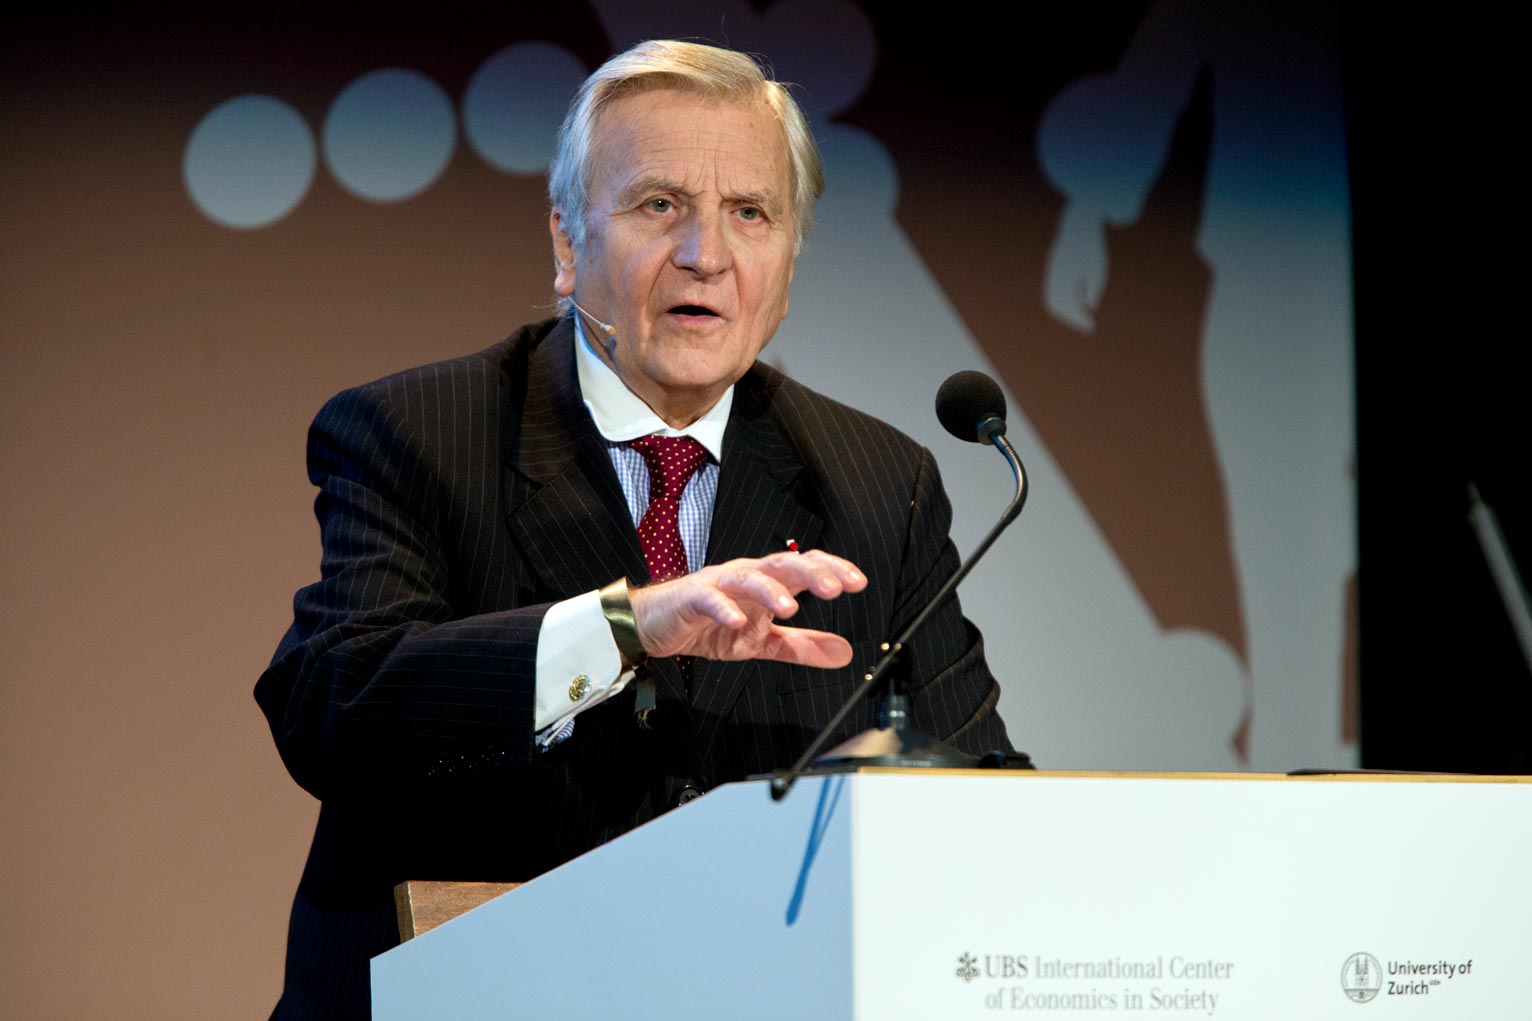 Jean-Claude Trichet, Chairman of the G30 and former President of the European Central Bank, delivered the opening lecture